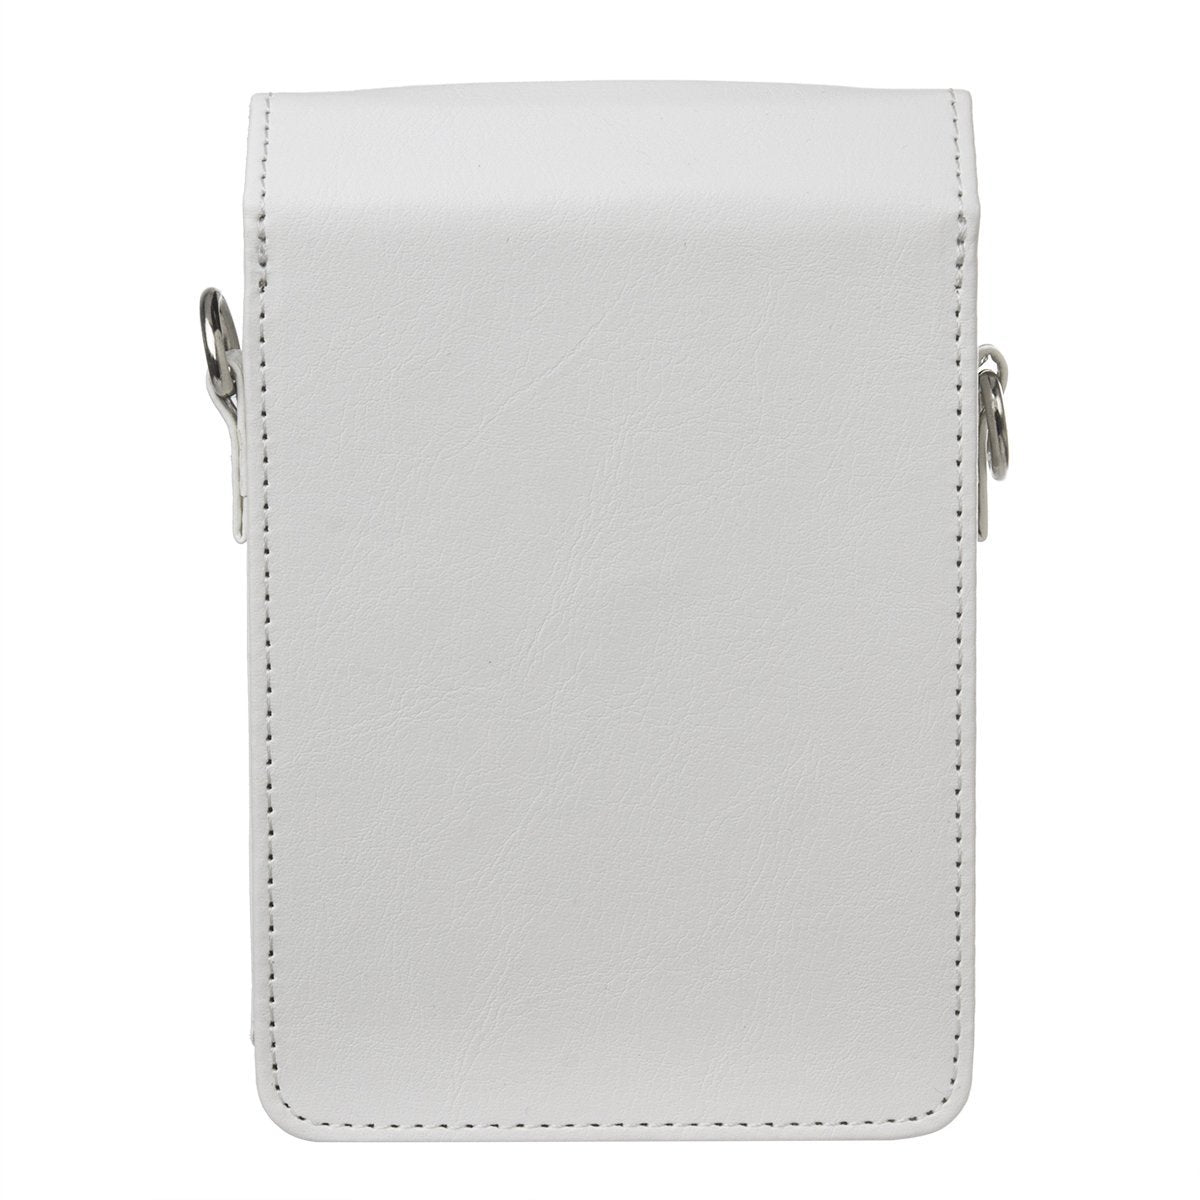 CAIUL PU Leather Case for Fujifilm INSTAX SHARE SP2 Smart Phone Printer (White)